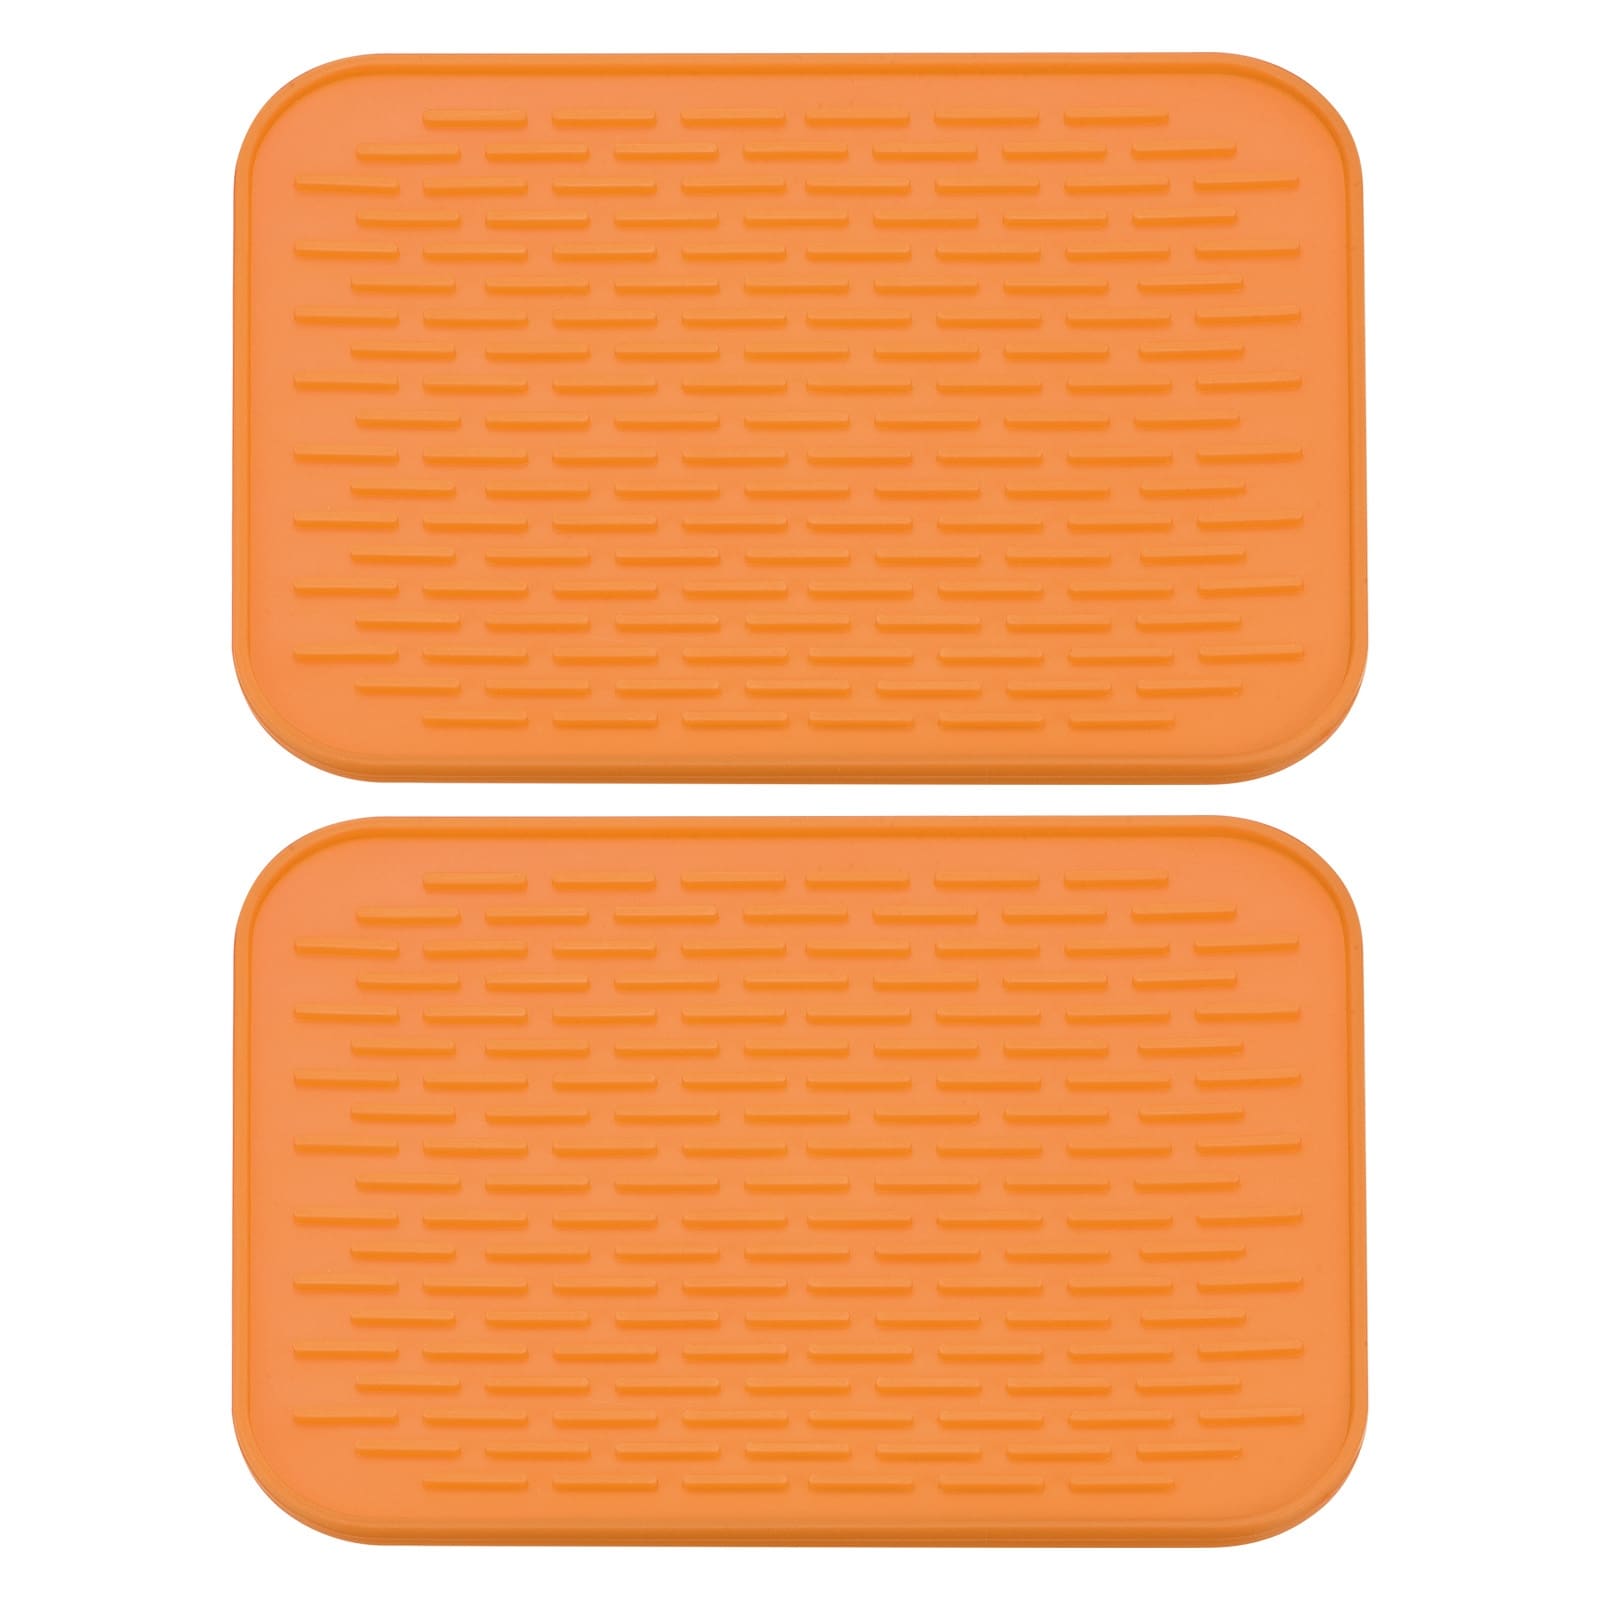 https://ak1.ostkcdn.com/images/products/is/images/direct/4d9435c03d53e0719259175d5ebb8798f3e7314e/Dish-Drying-Mat-Set-Under-Sink-Drain-Pad-Heat-Resistant-Suitable-for-K.jpg